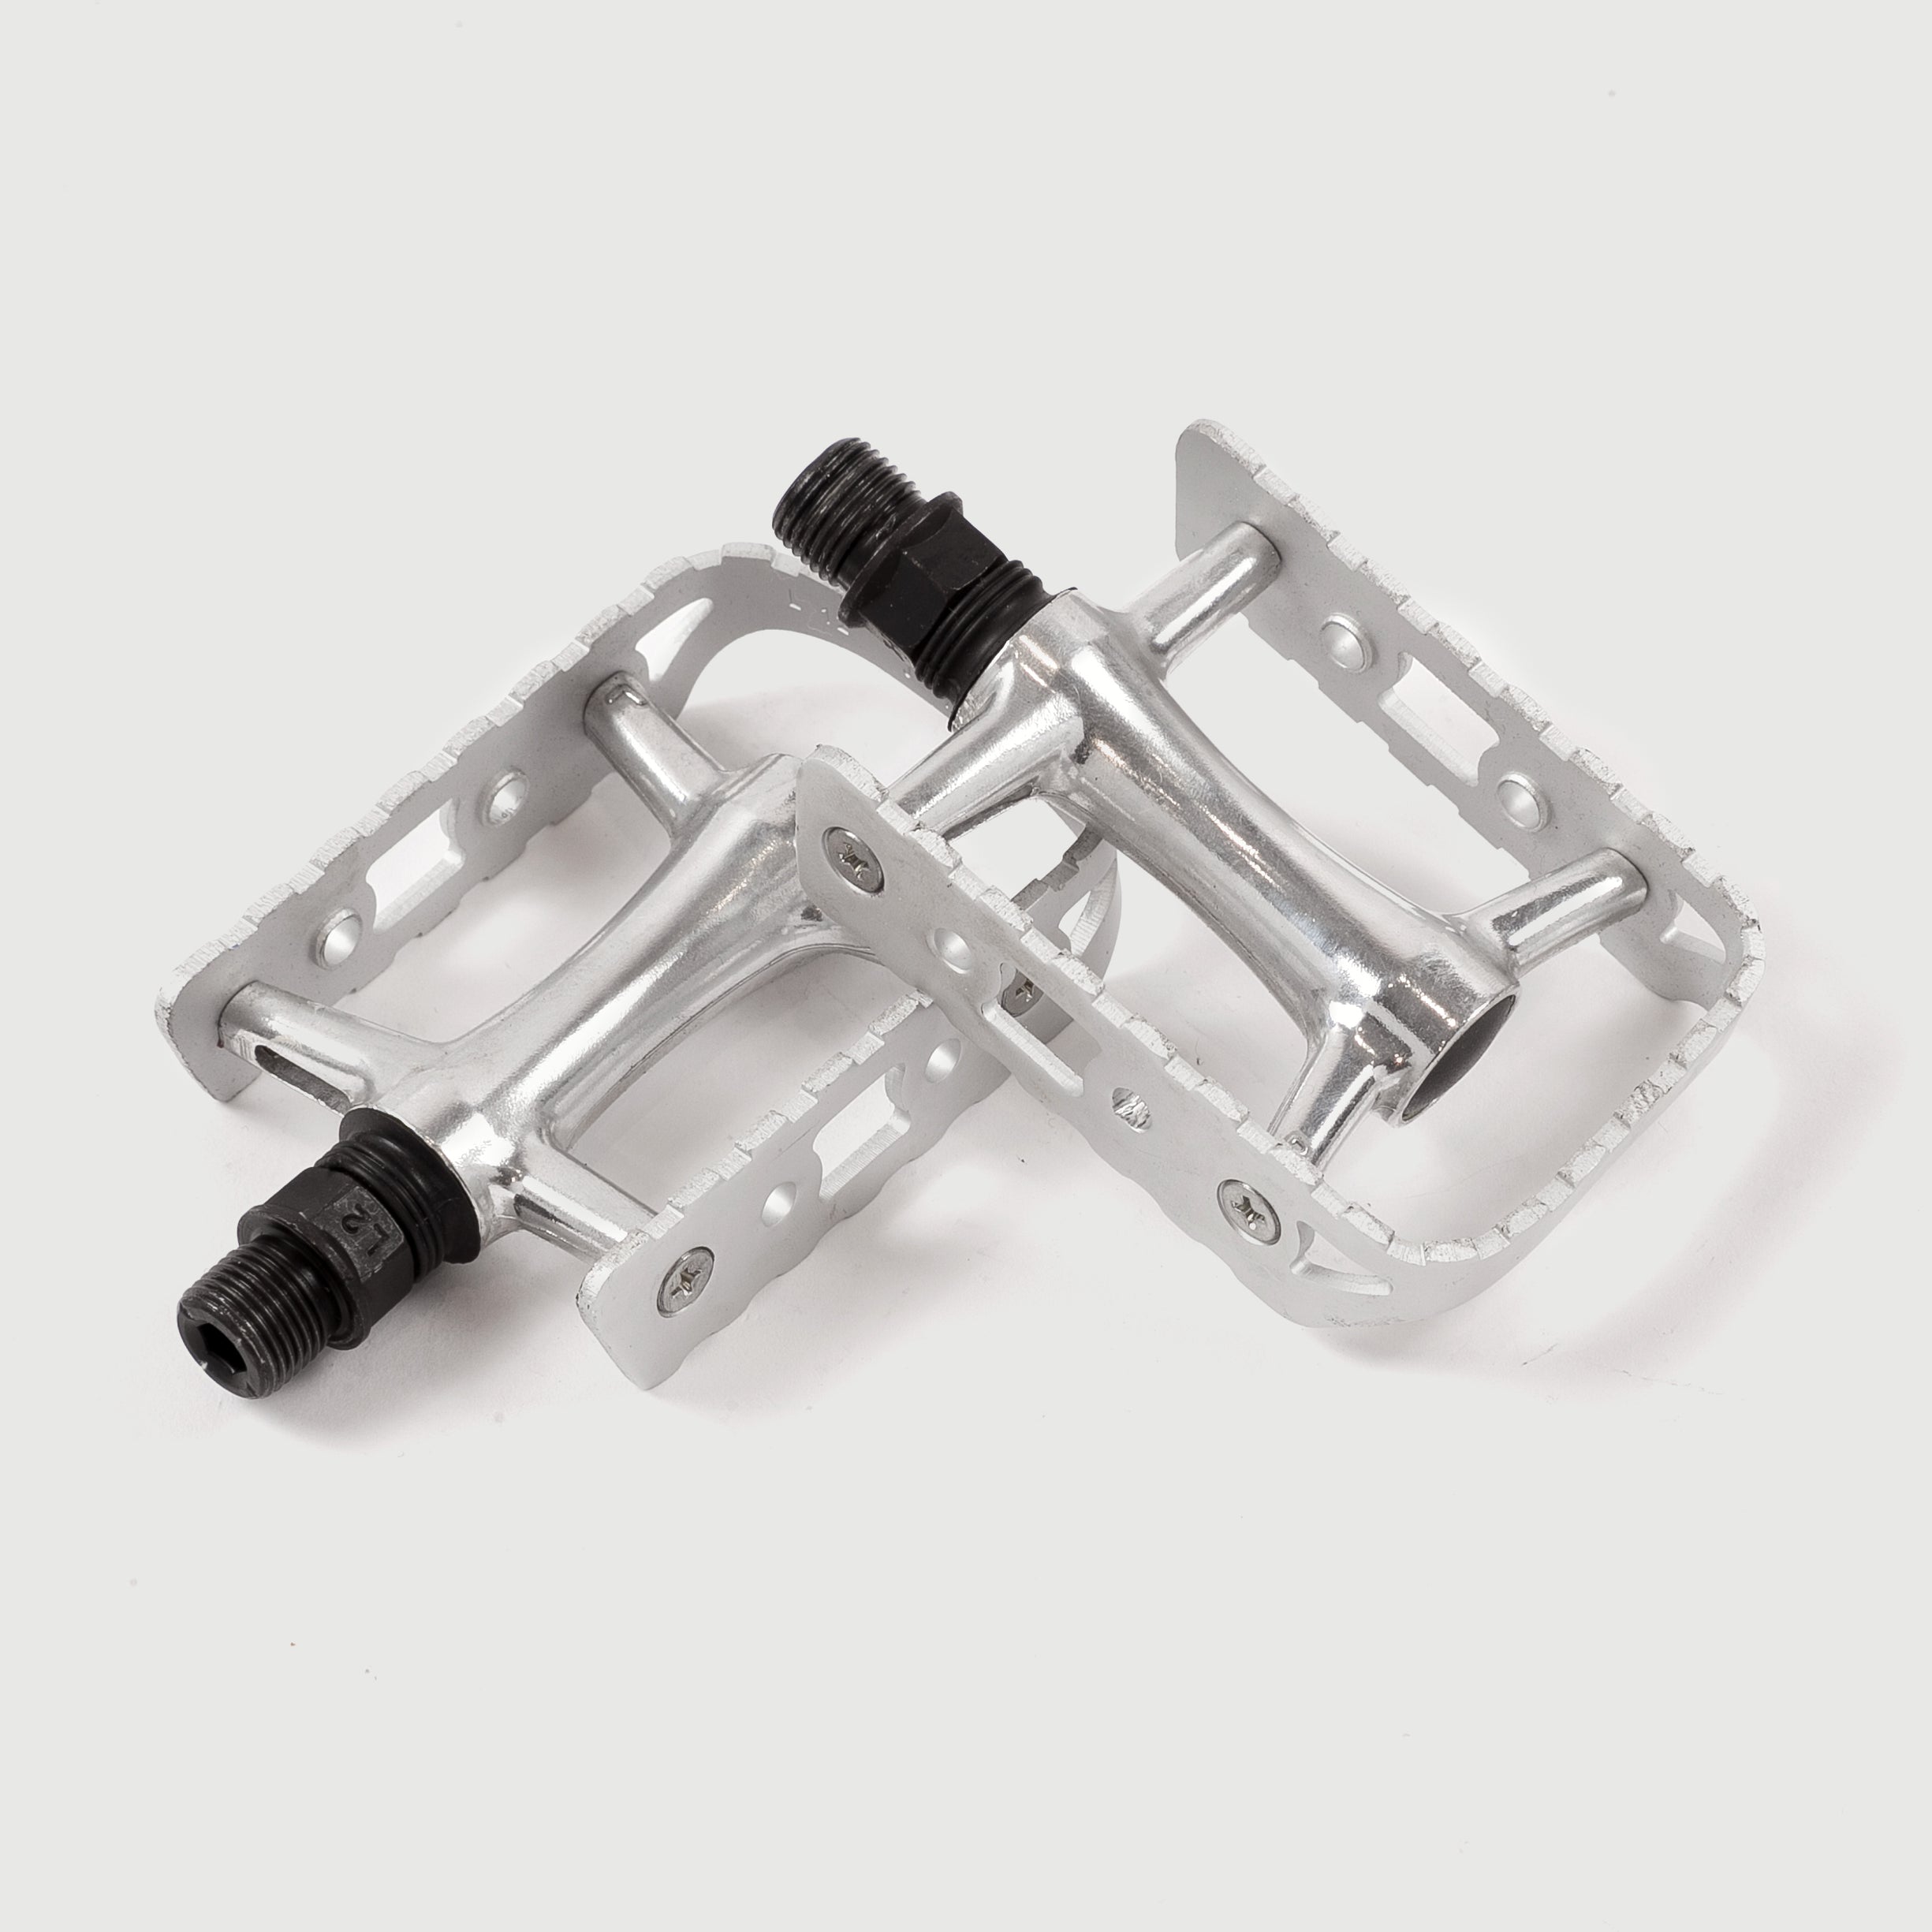 R-200 Silver Pedals